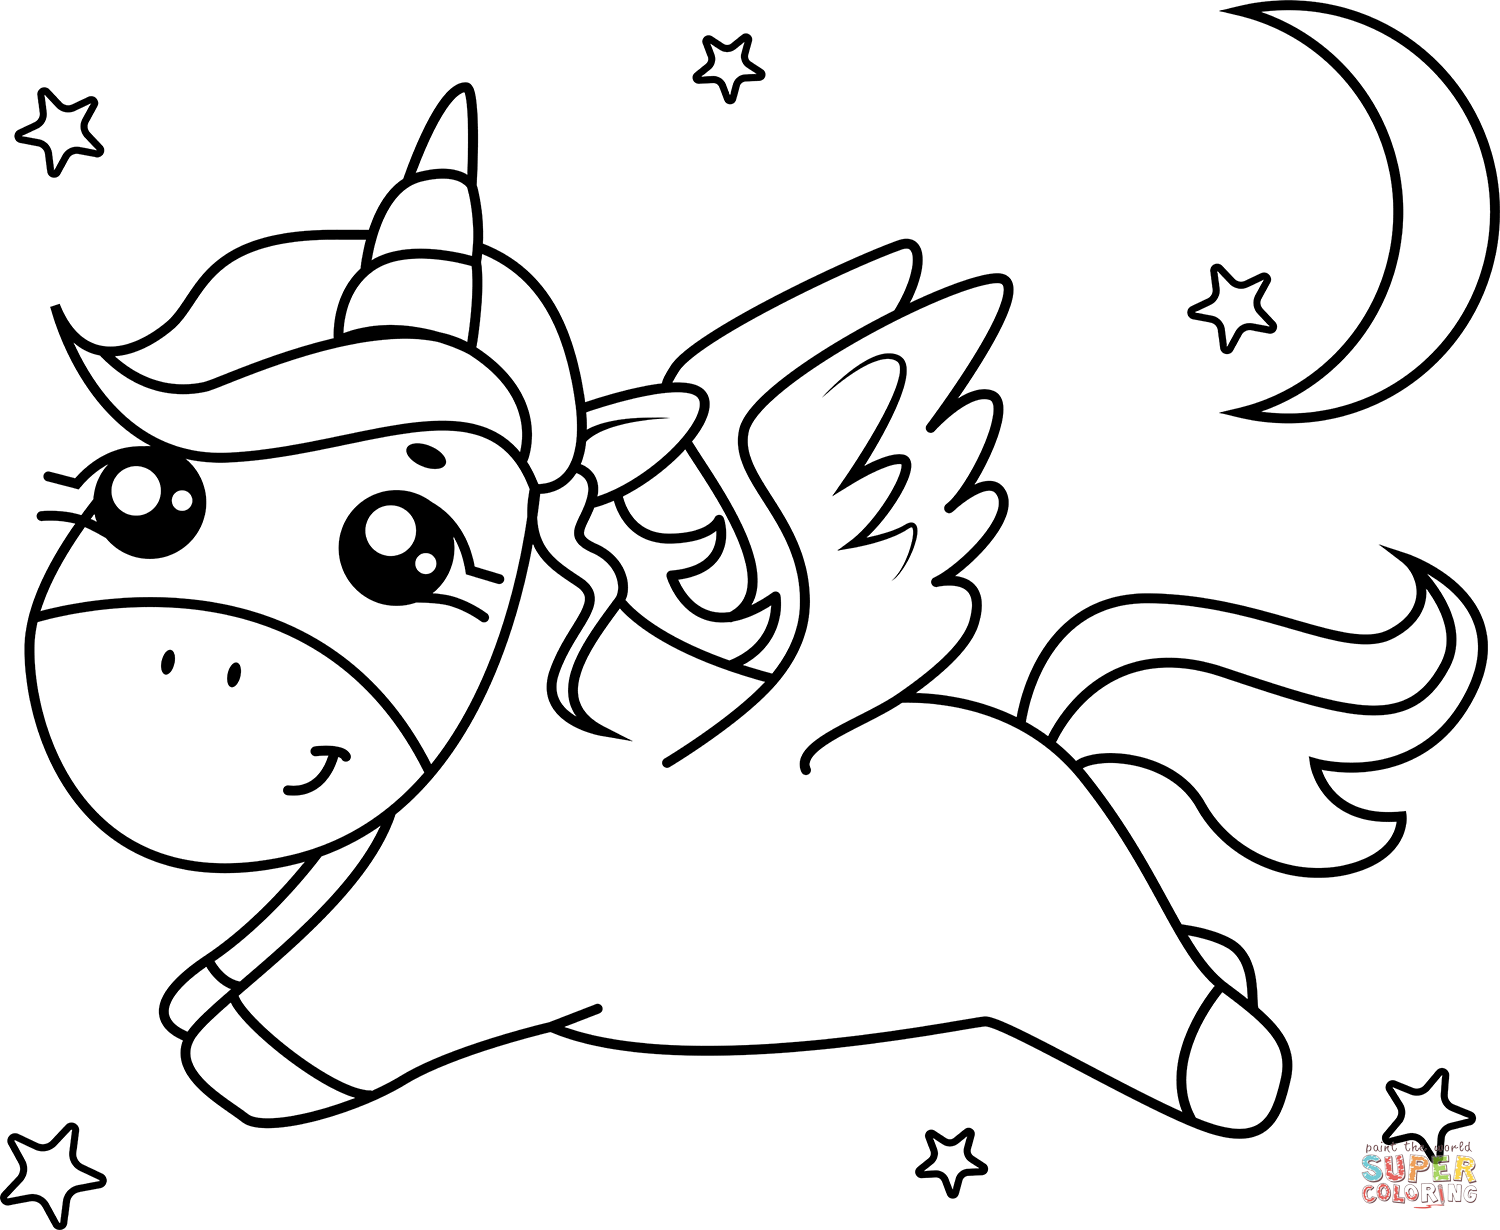 Pegasus unicorn coloring page free printable coloring pages